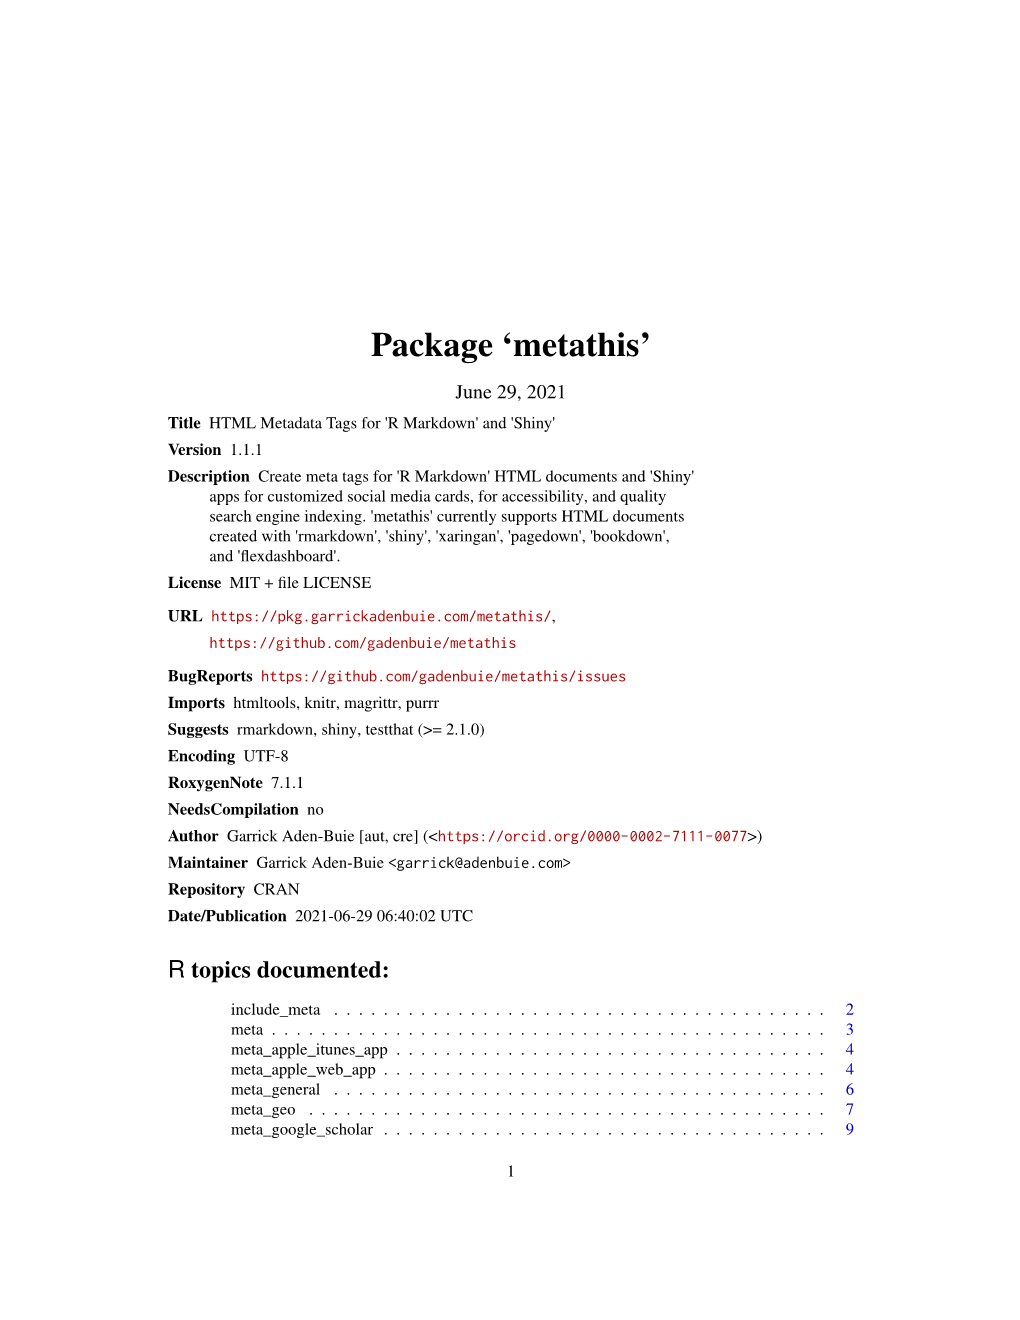 Metathis: HTML Metadata Tags for 'R Markdown' and 'Shiny'